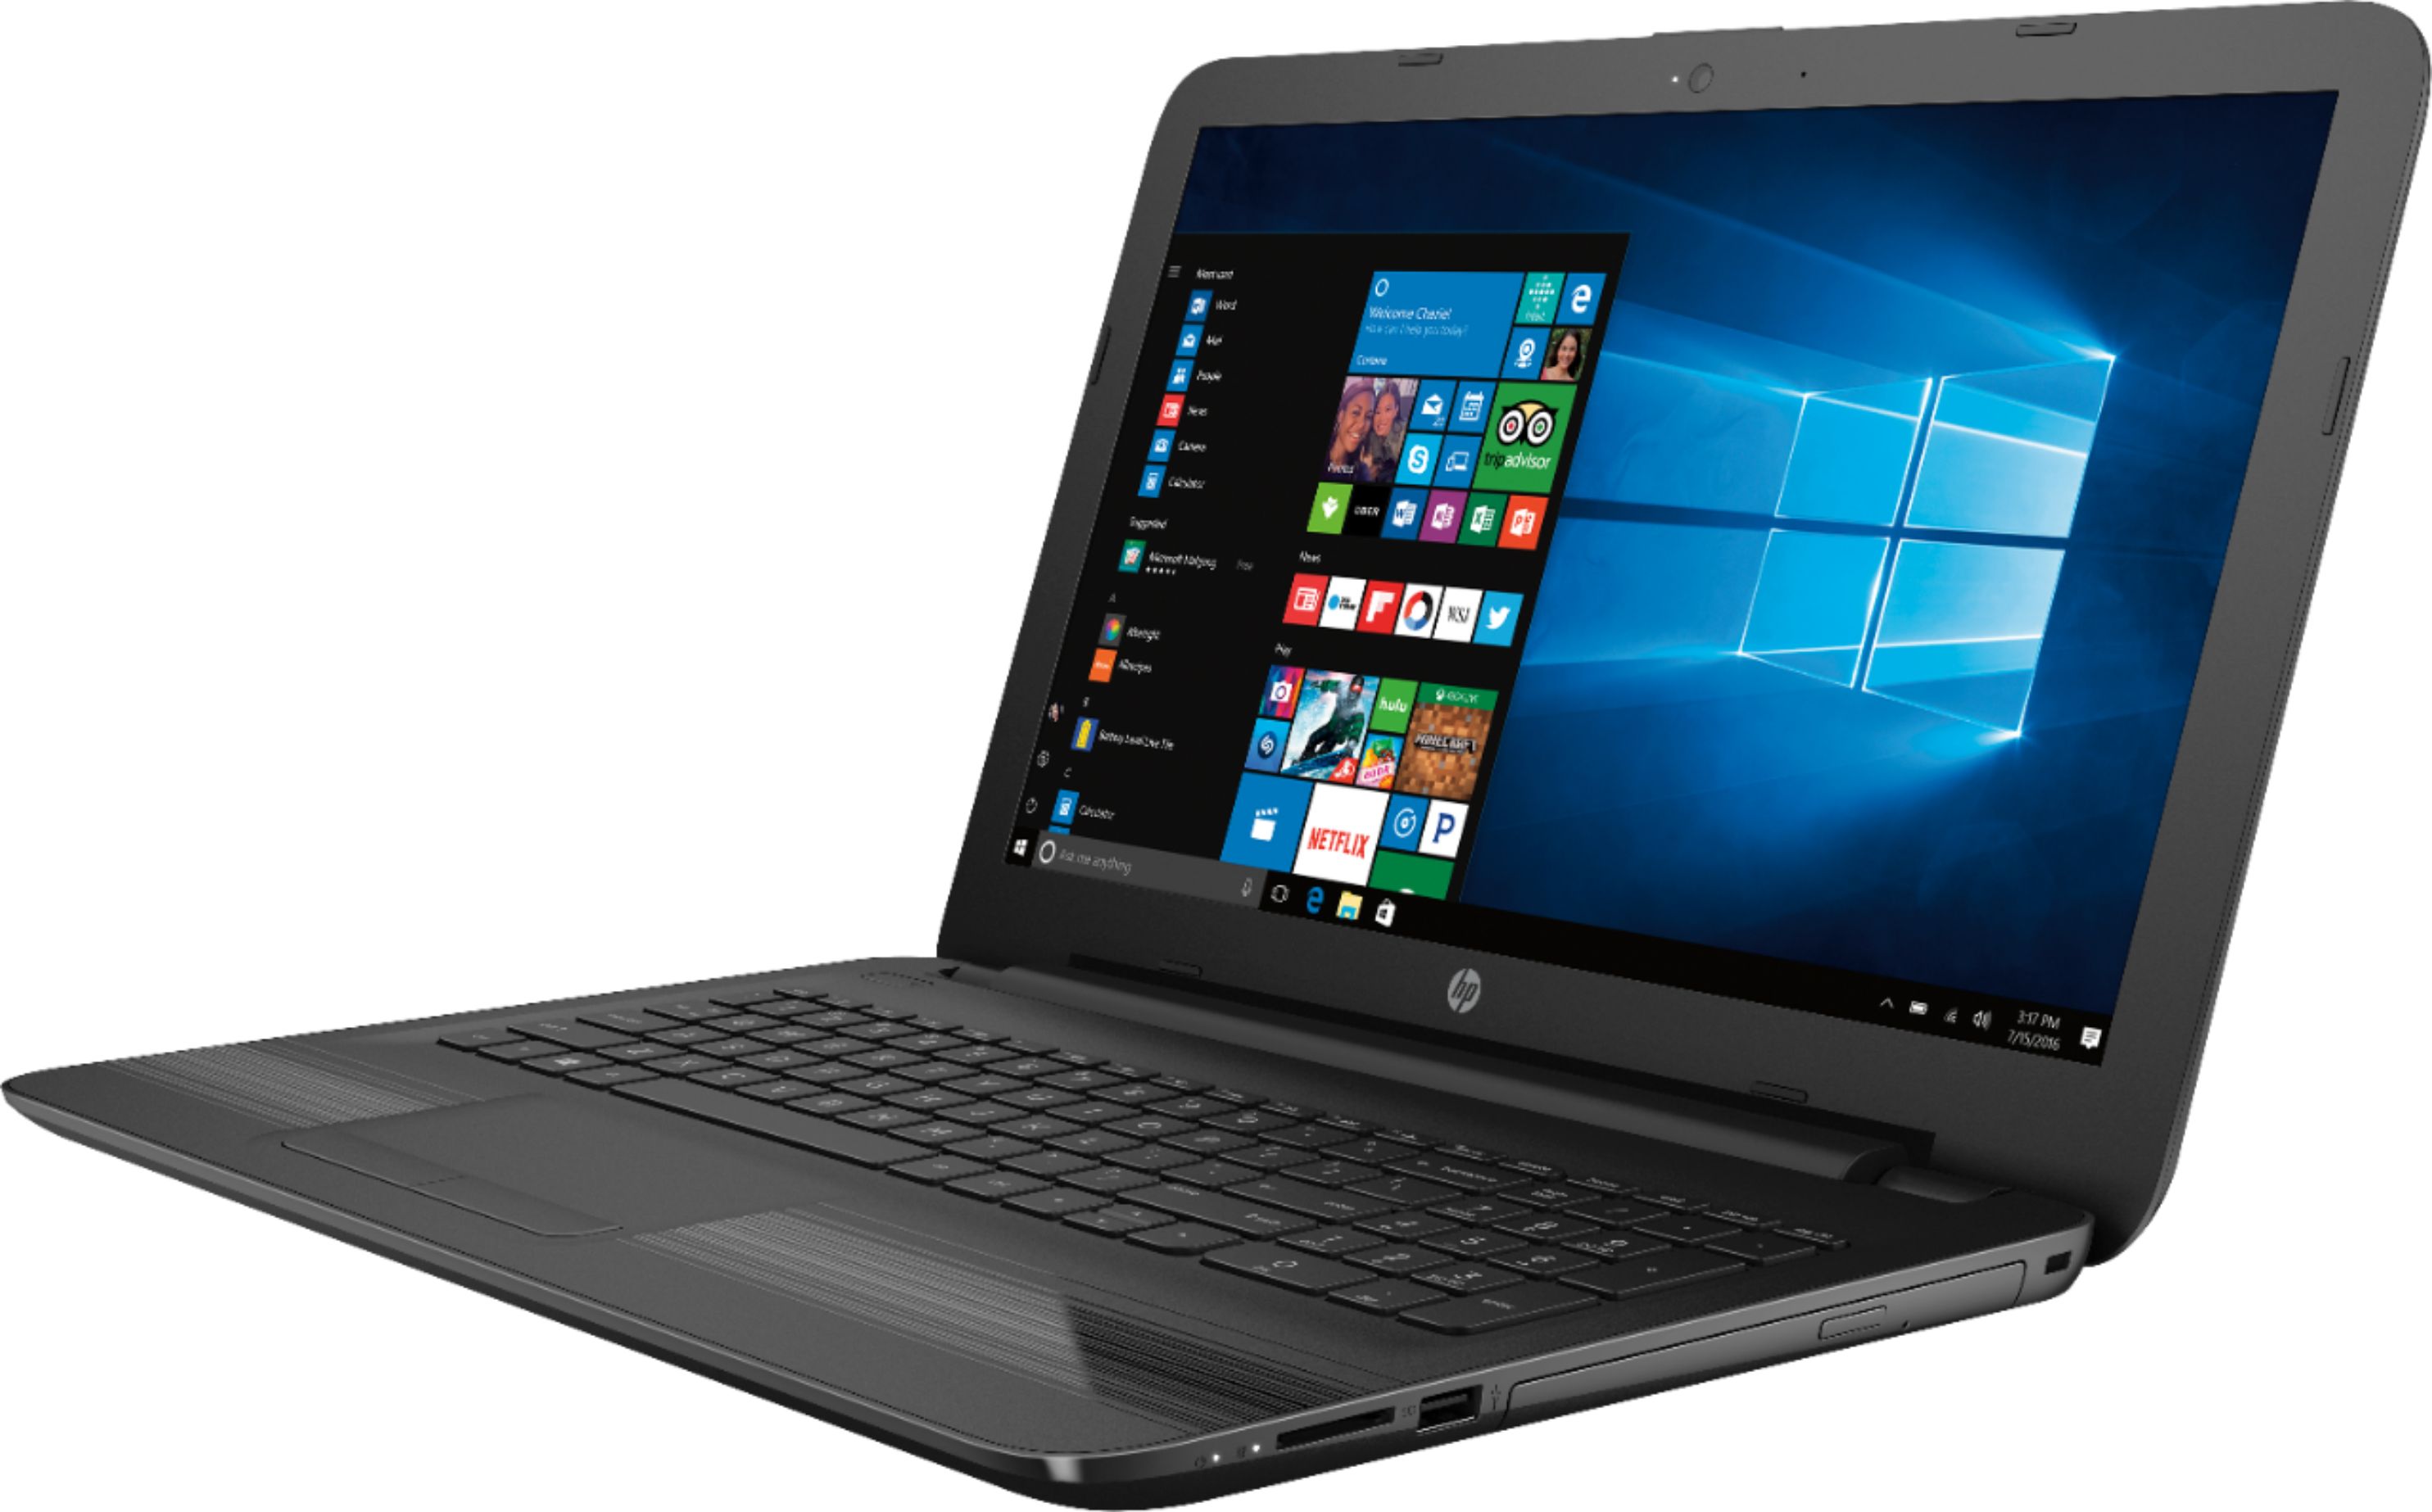 Best Buy 156 Touch Screen Laptop Intel Core I5 8gb Memory 1tb Hard Drive Hp Finish In Jet 2396